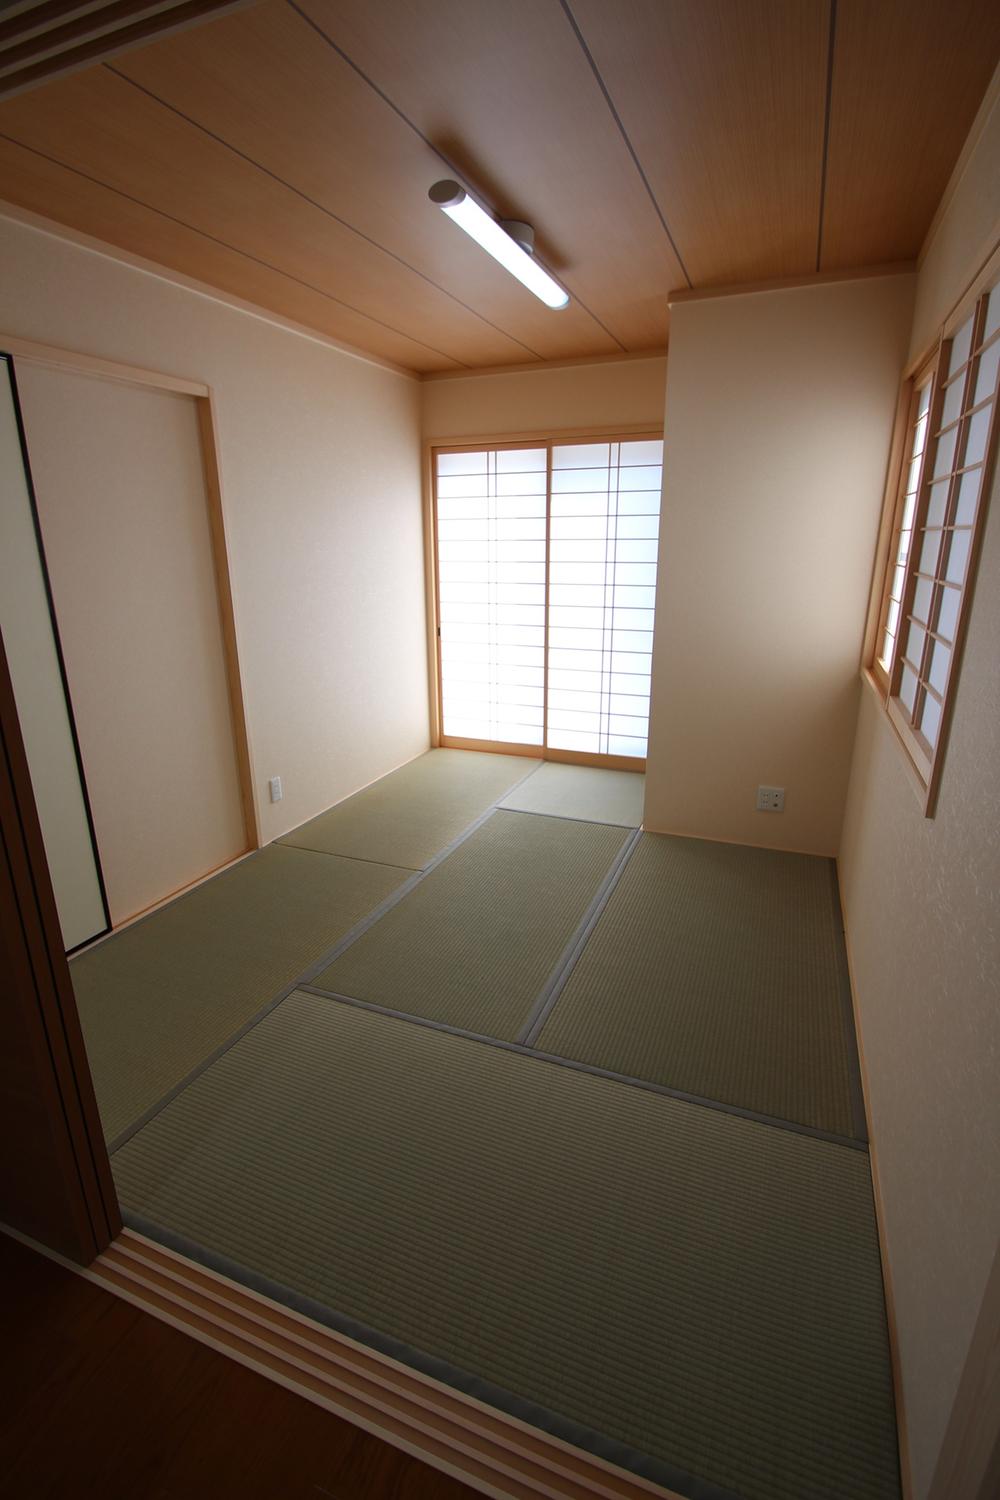 Non-living room. No. 3 destination of Japanese-style room